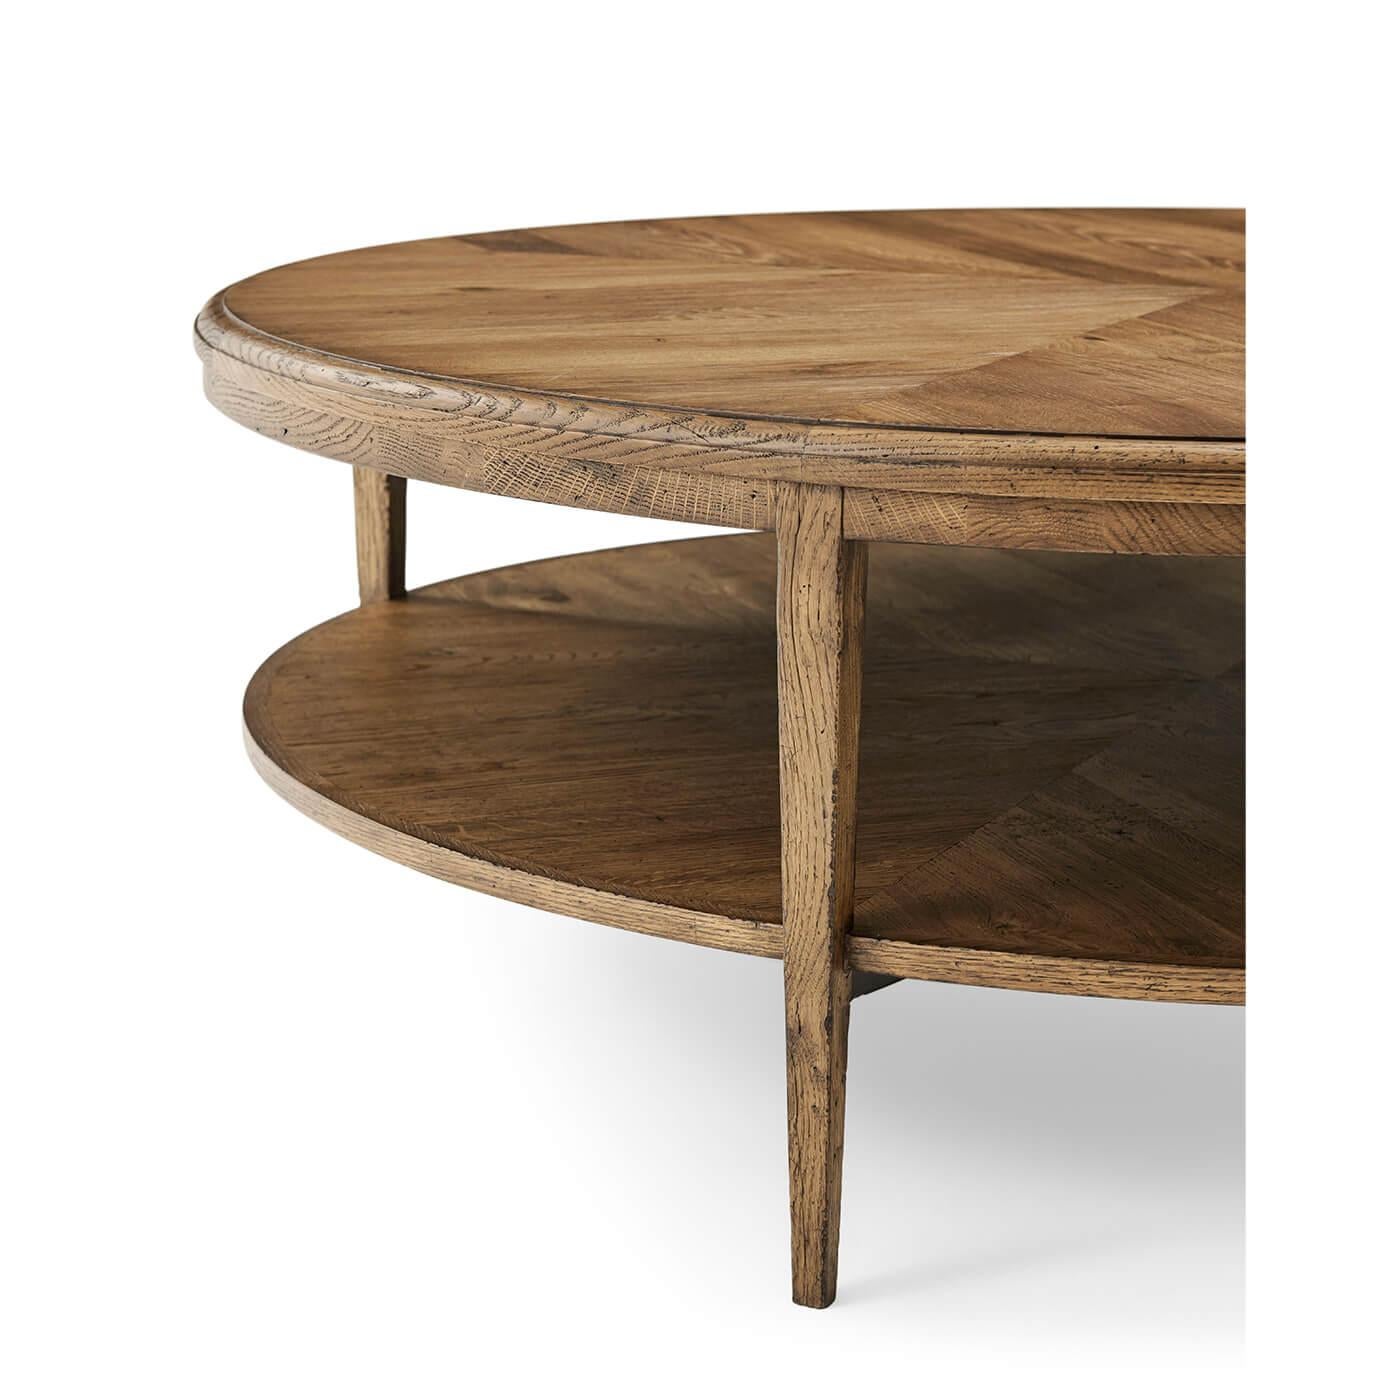 Vietnamese Modern Parquetry Round Coffee Table, Light Oak For Sale